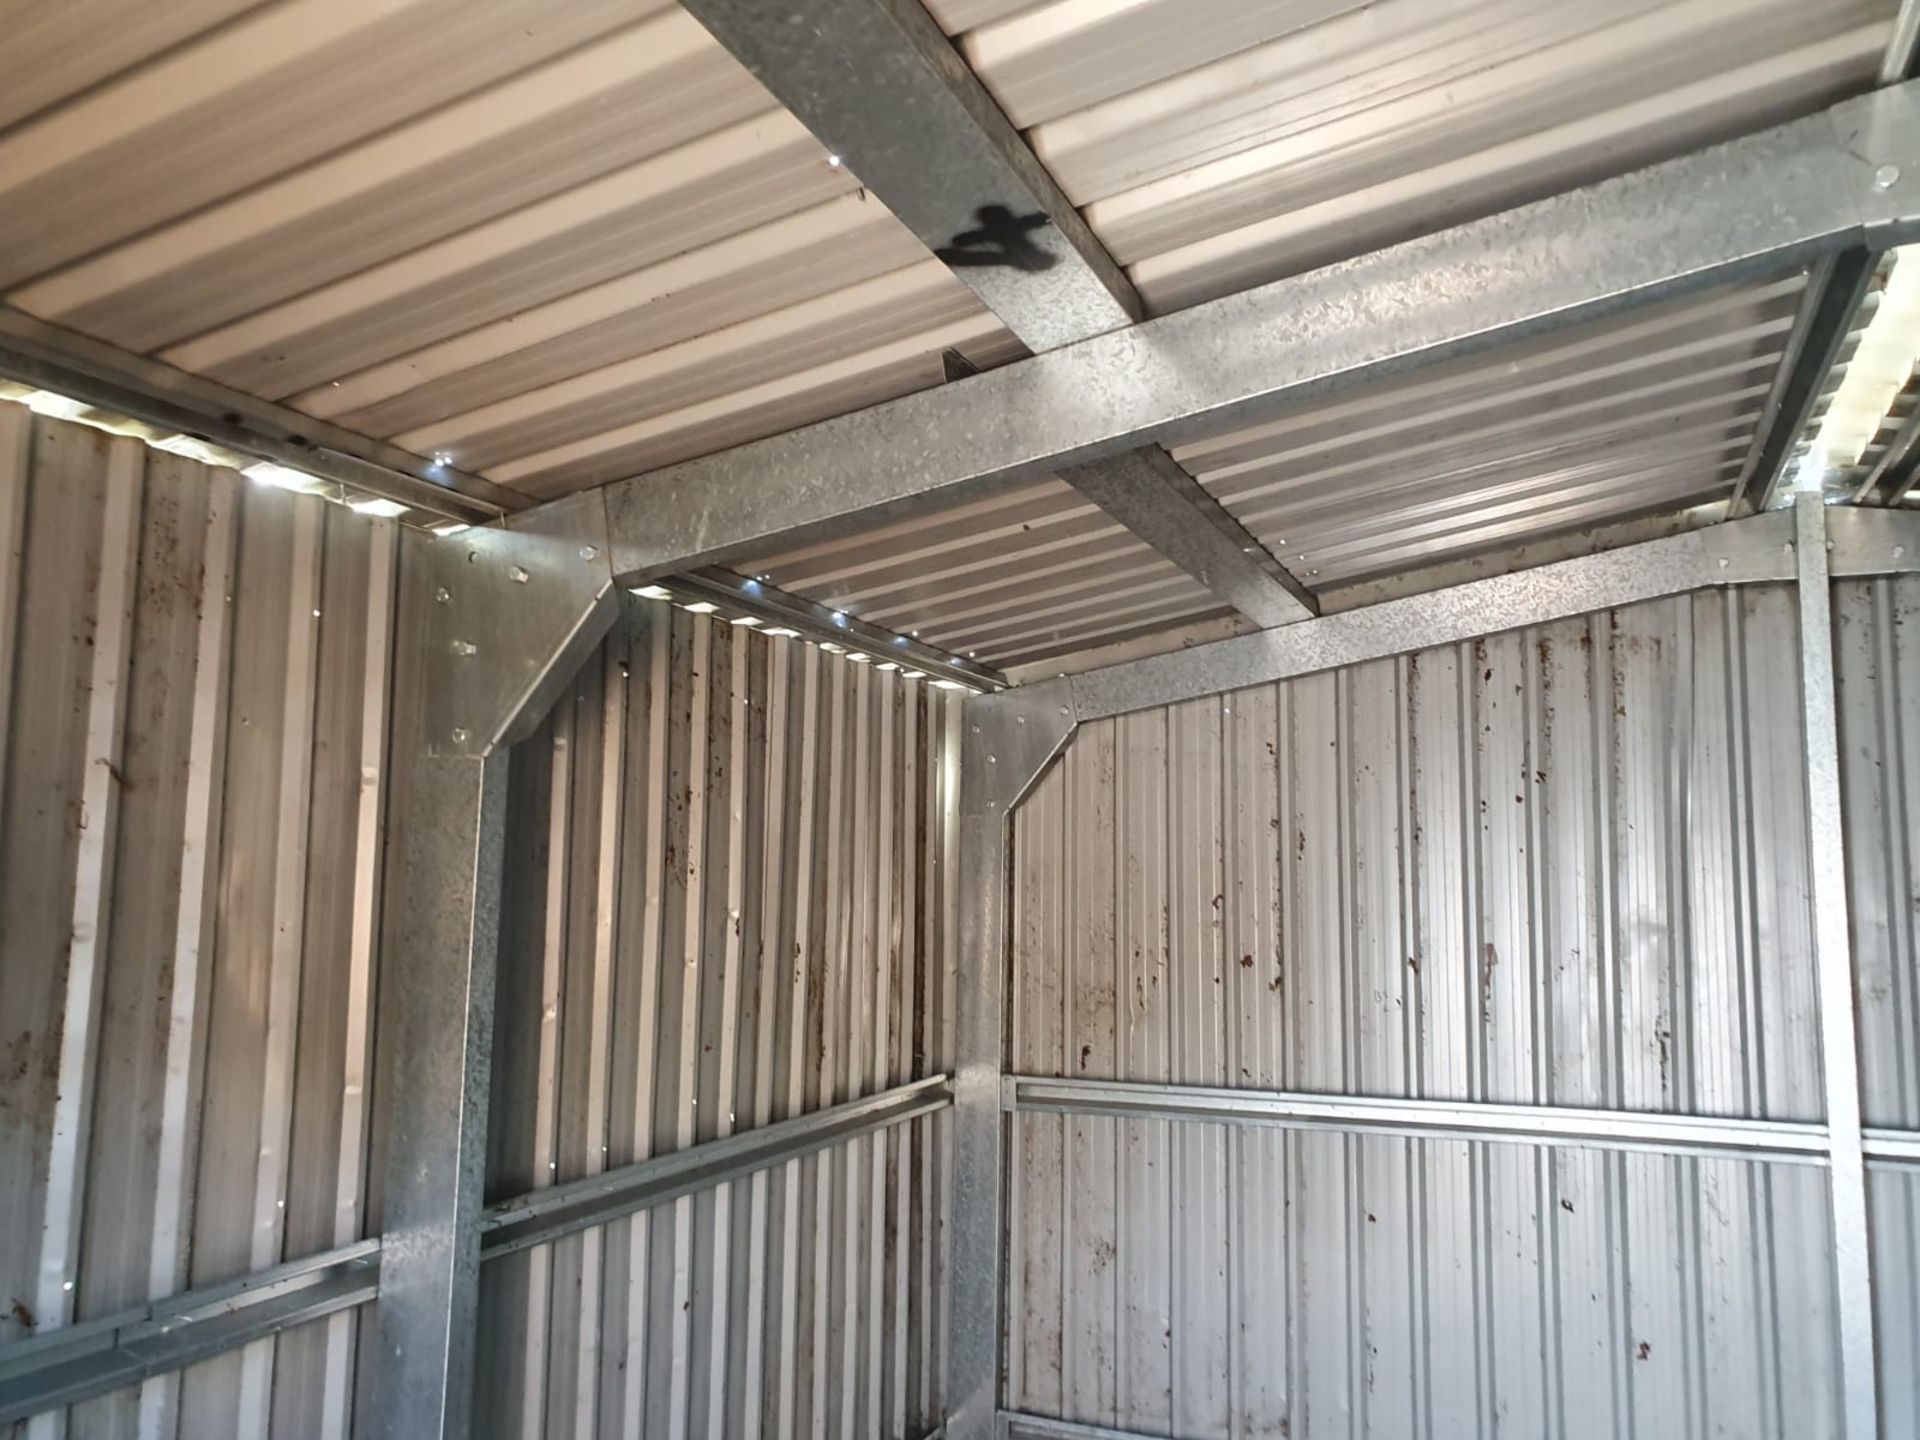 1 x Large Steel Storage Shed Container With Four Wooden Folding Doors - Approx Dimensions 5M x 5M - Image 14 of 16